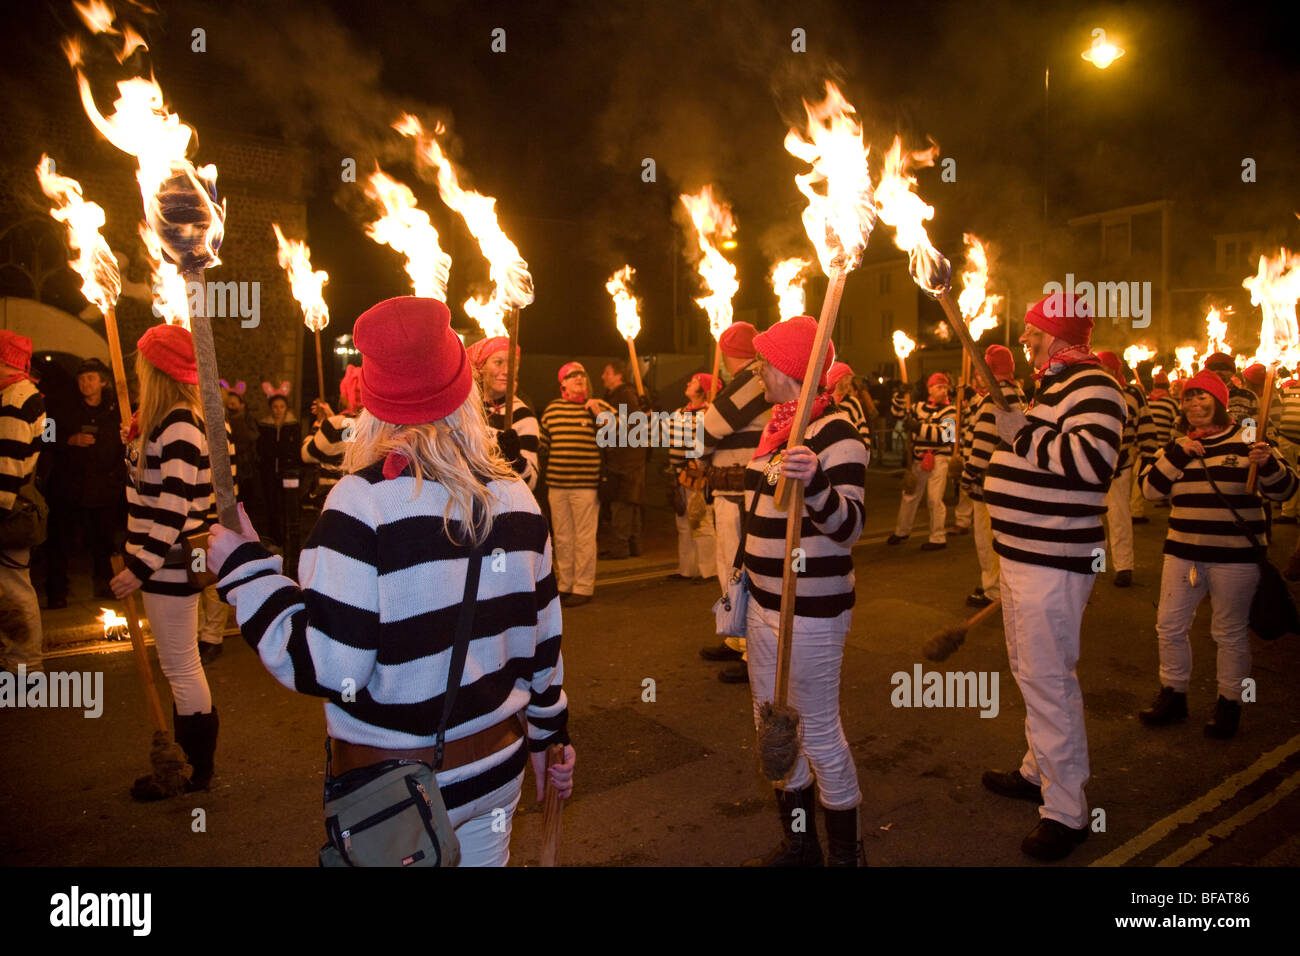 Members of a torch lit fire procession pause before the march through the streets of Lewes on Bonfire night, November 5th. Stock Photo